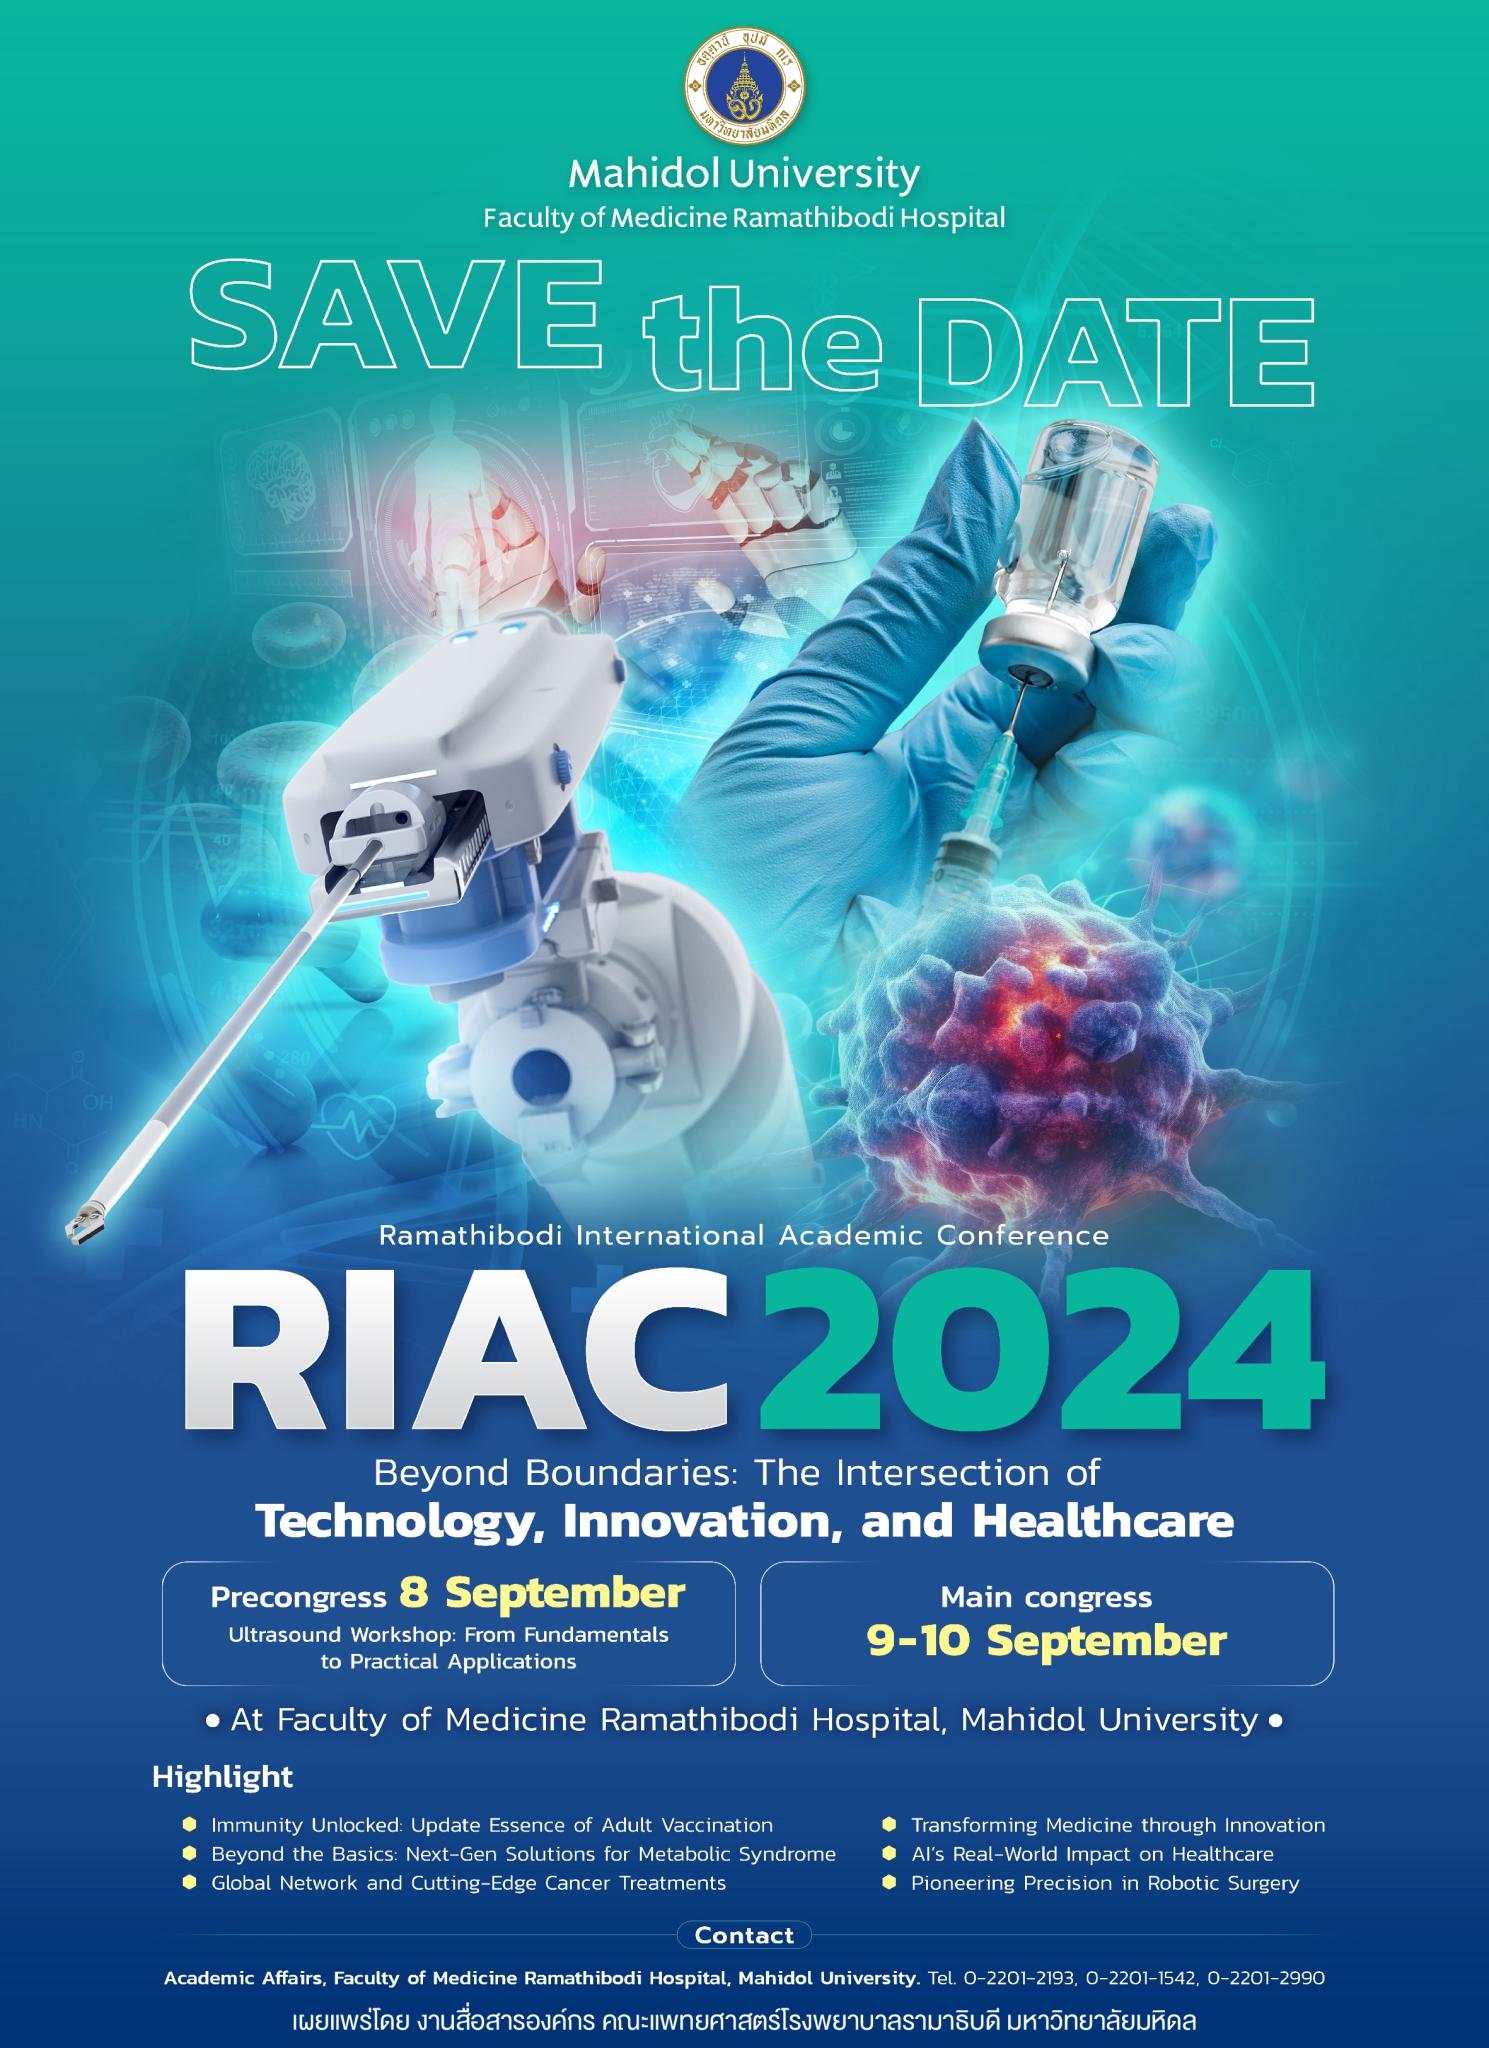 RIAC 2024 Beyond Boundaries: The Intersection of Technology, Innovation, and Healthcare